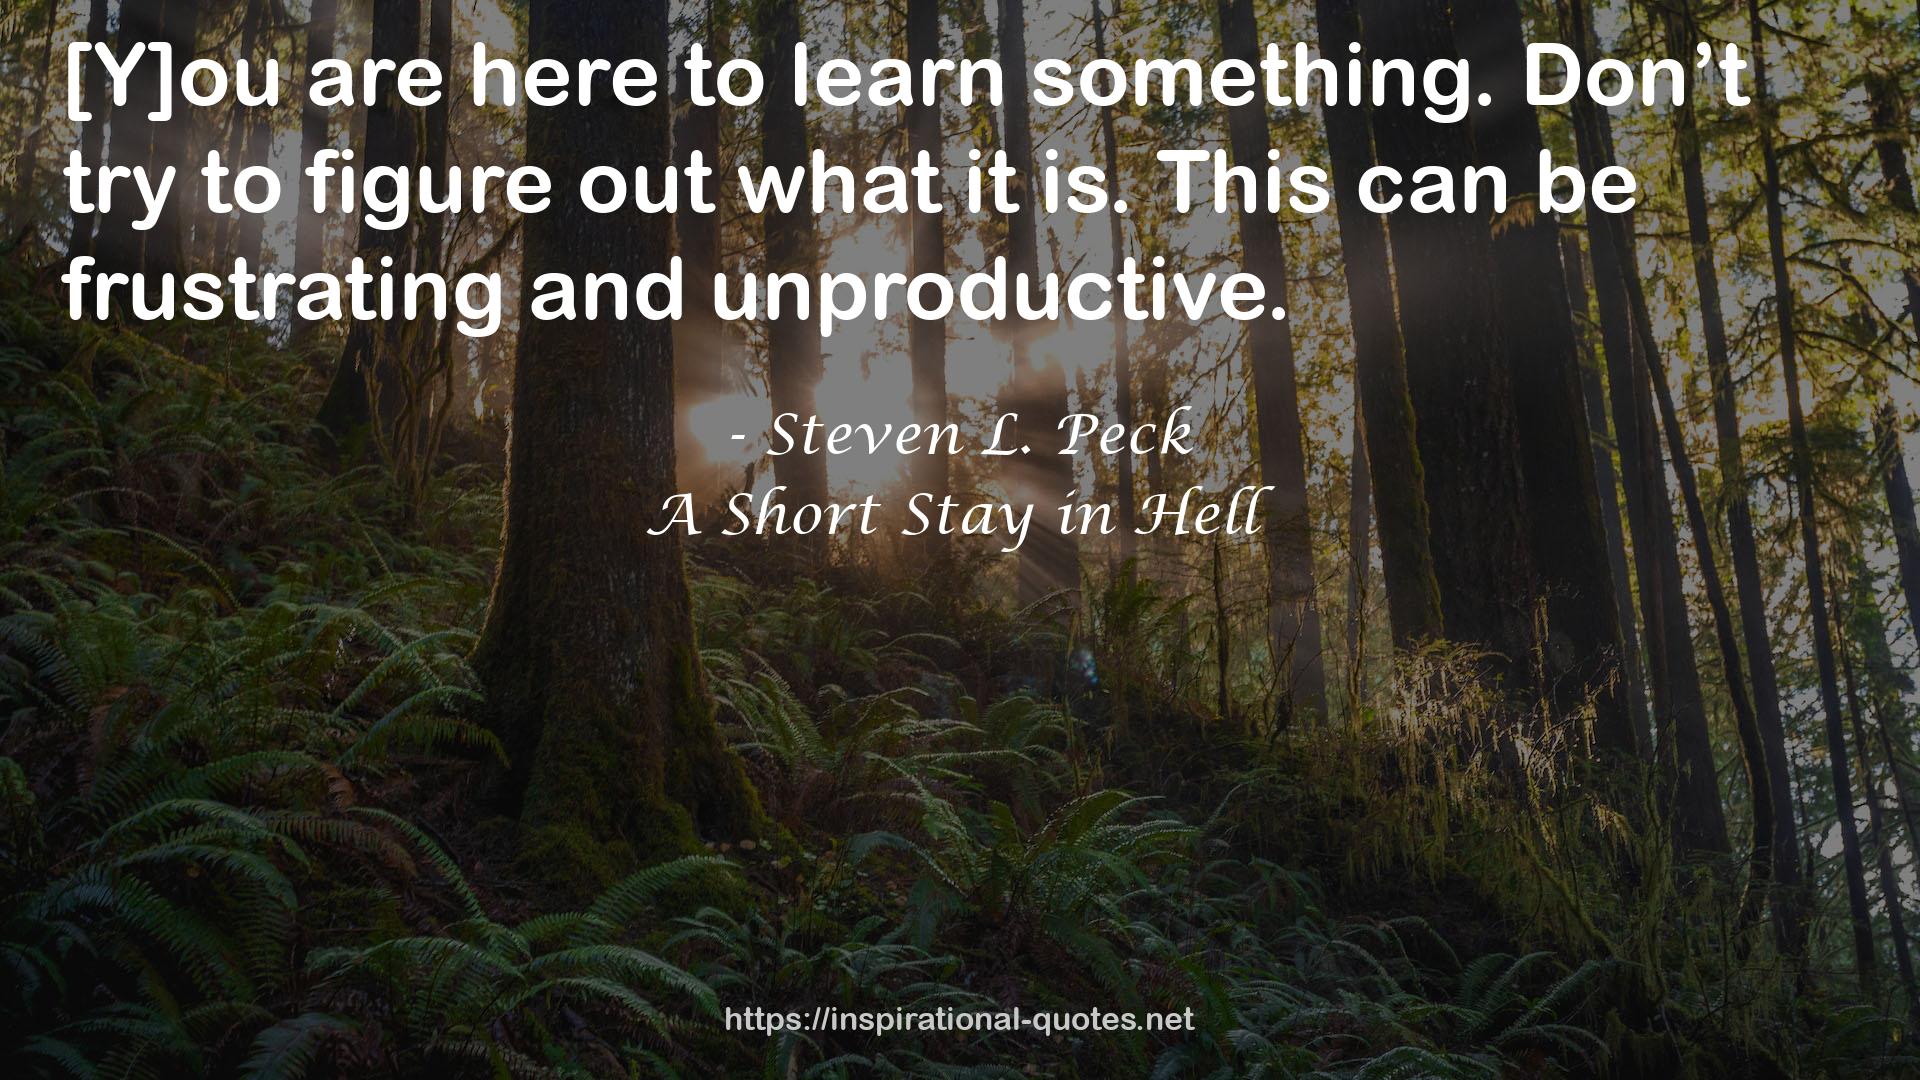 A Short Stay in Hell QUOTES